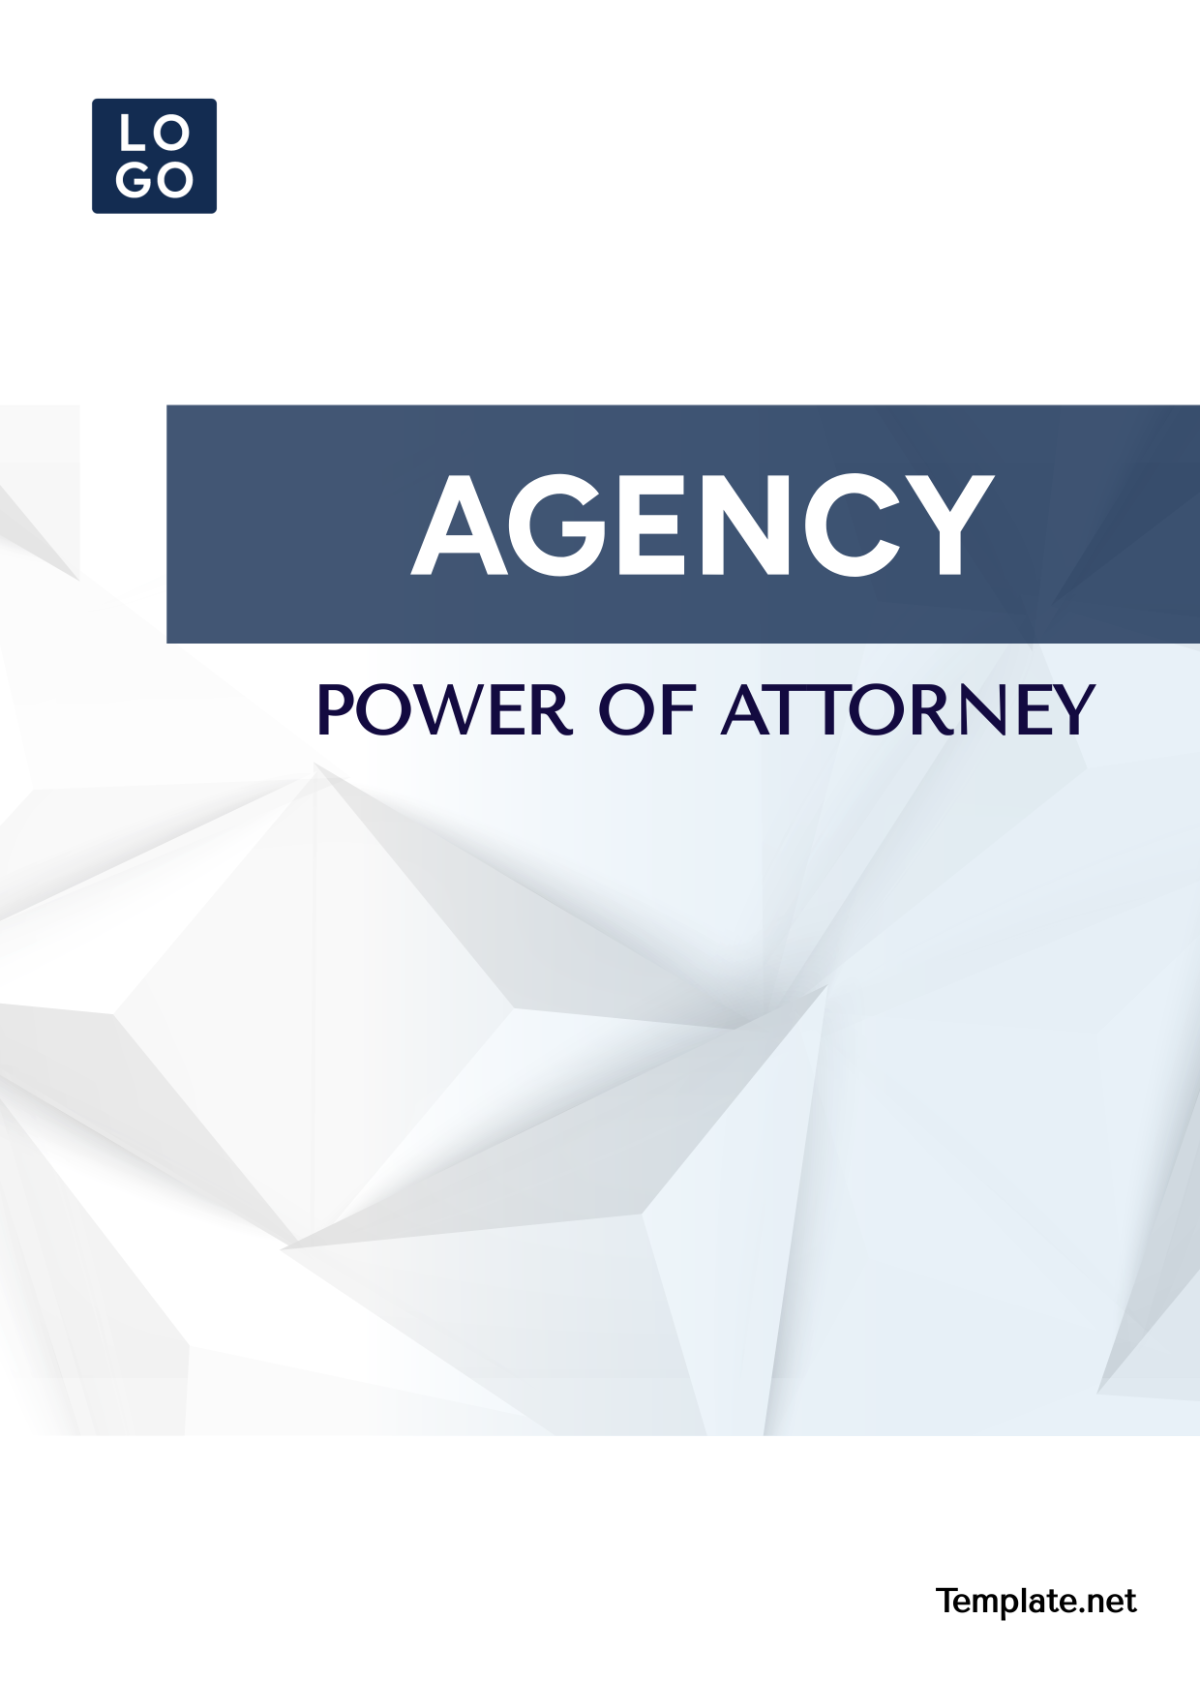 Agency Power of Attorney Template